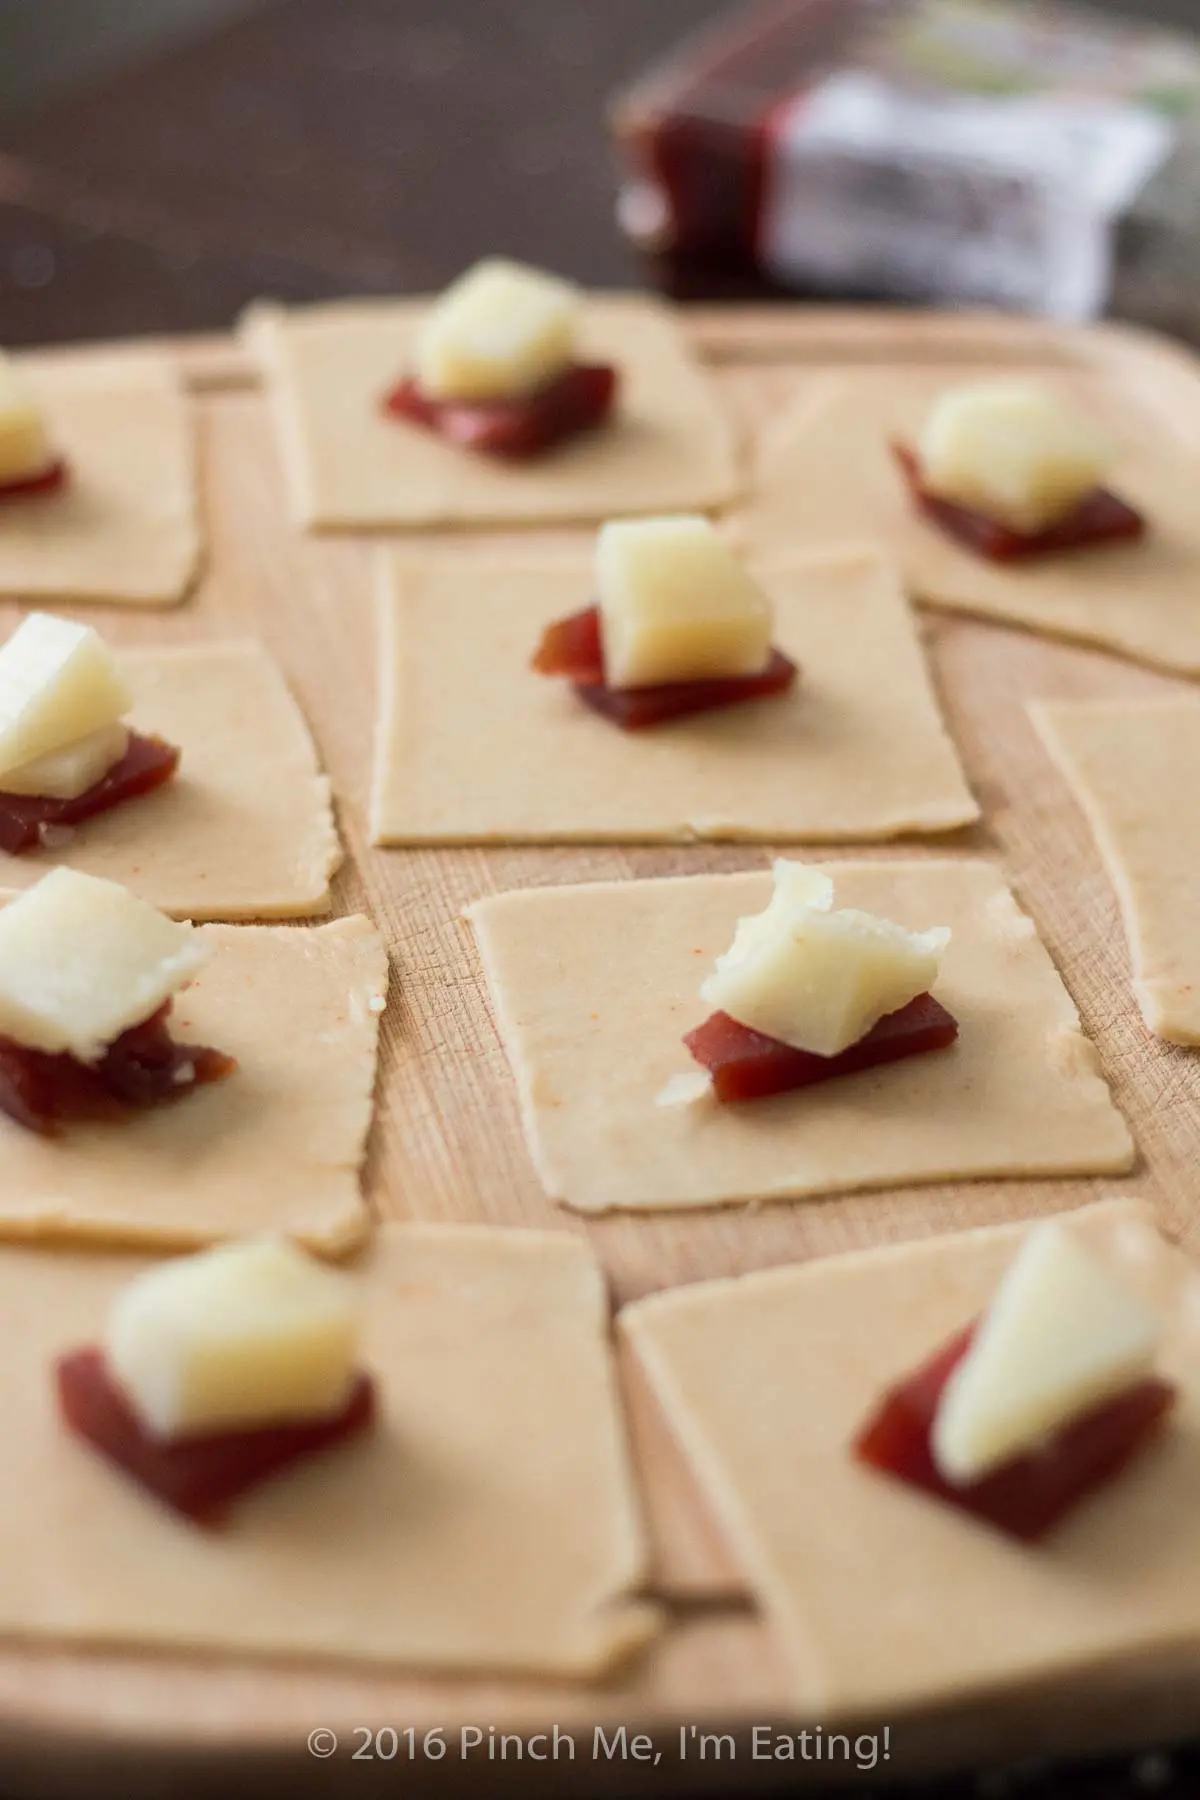 Squares of pastry dough topped with pieces of guava paste and manchego cheese on a wooden cutting board.